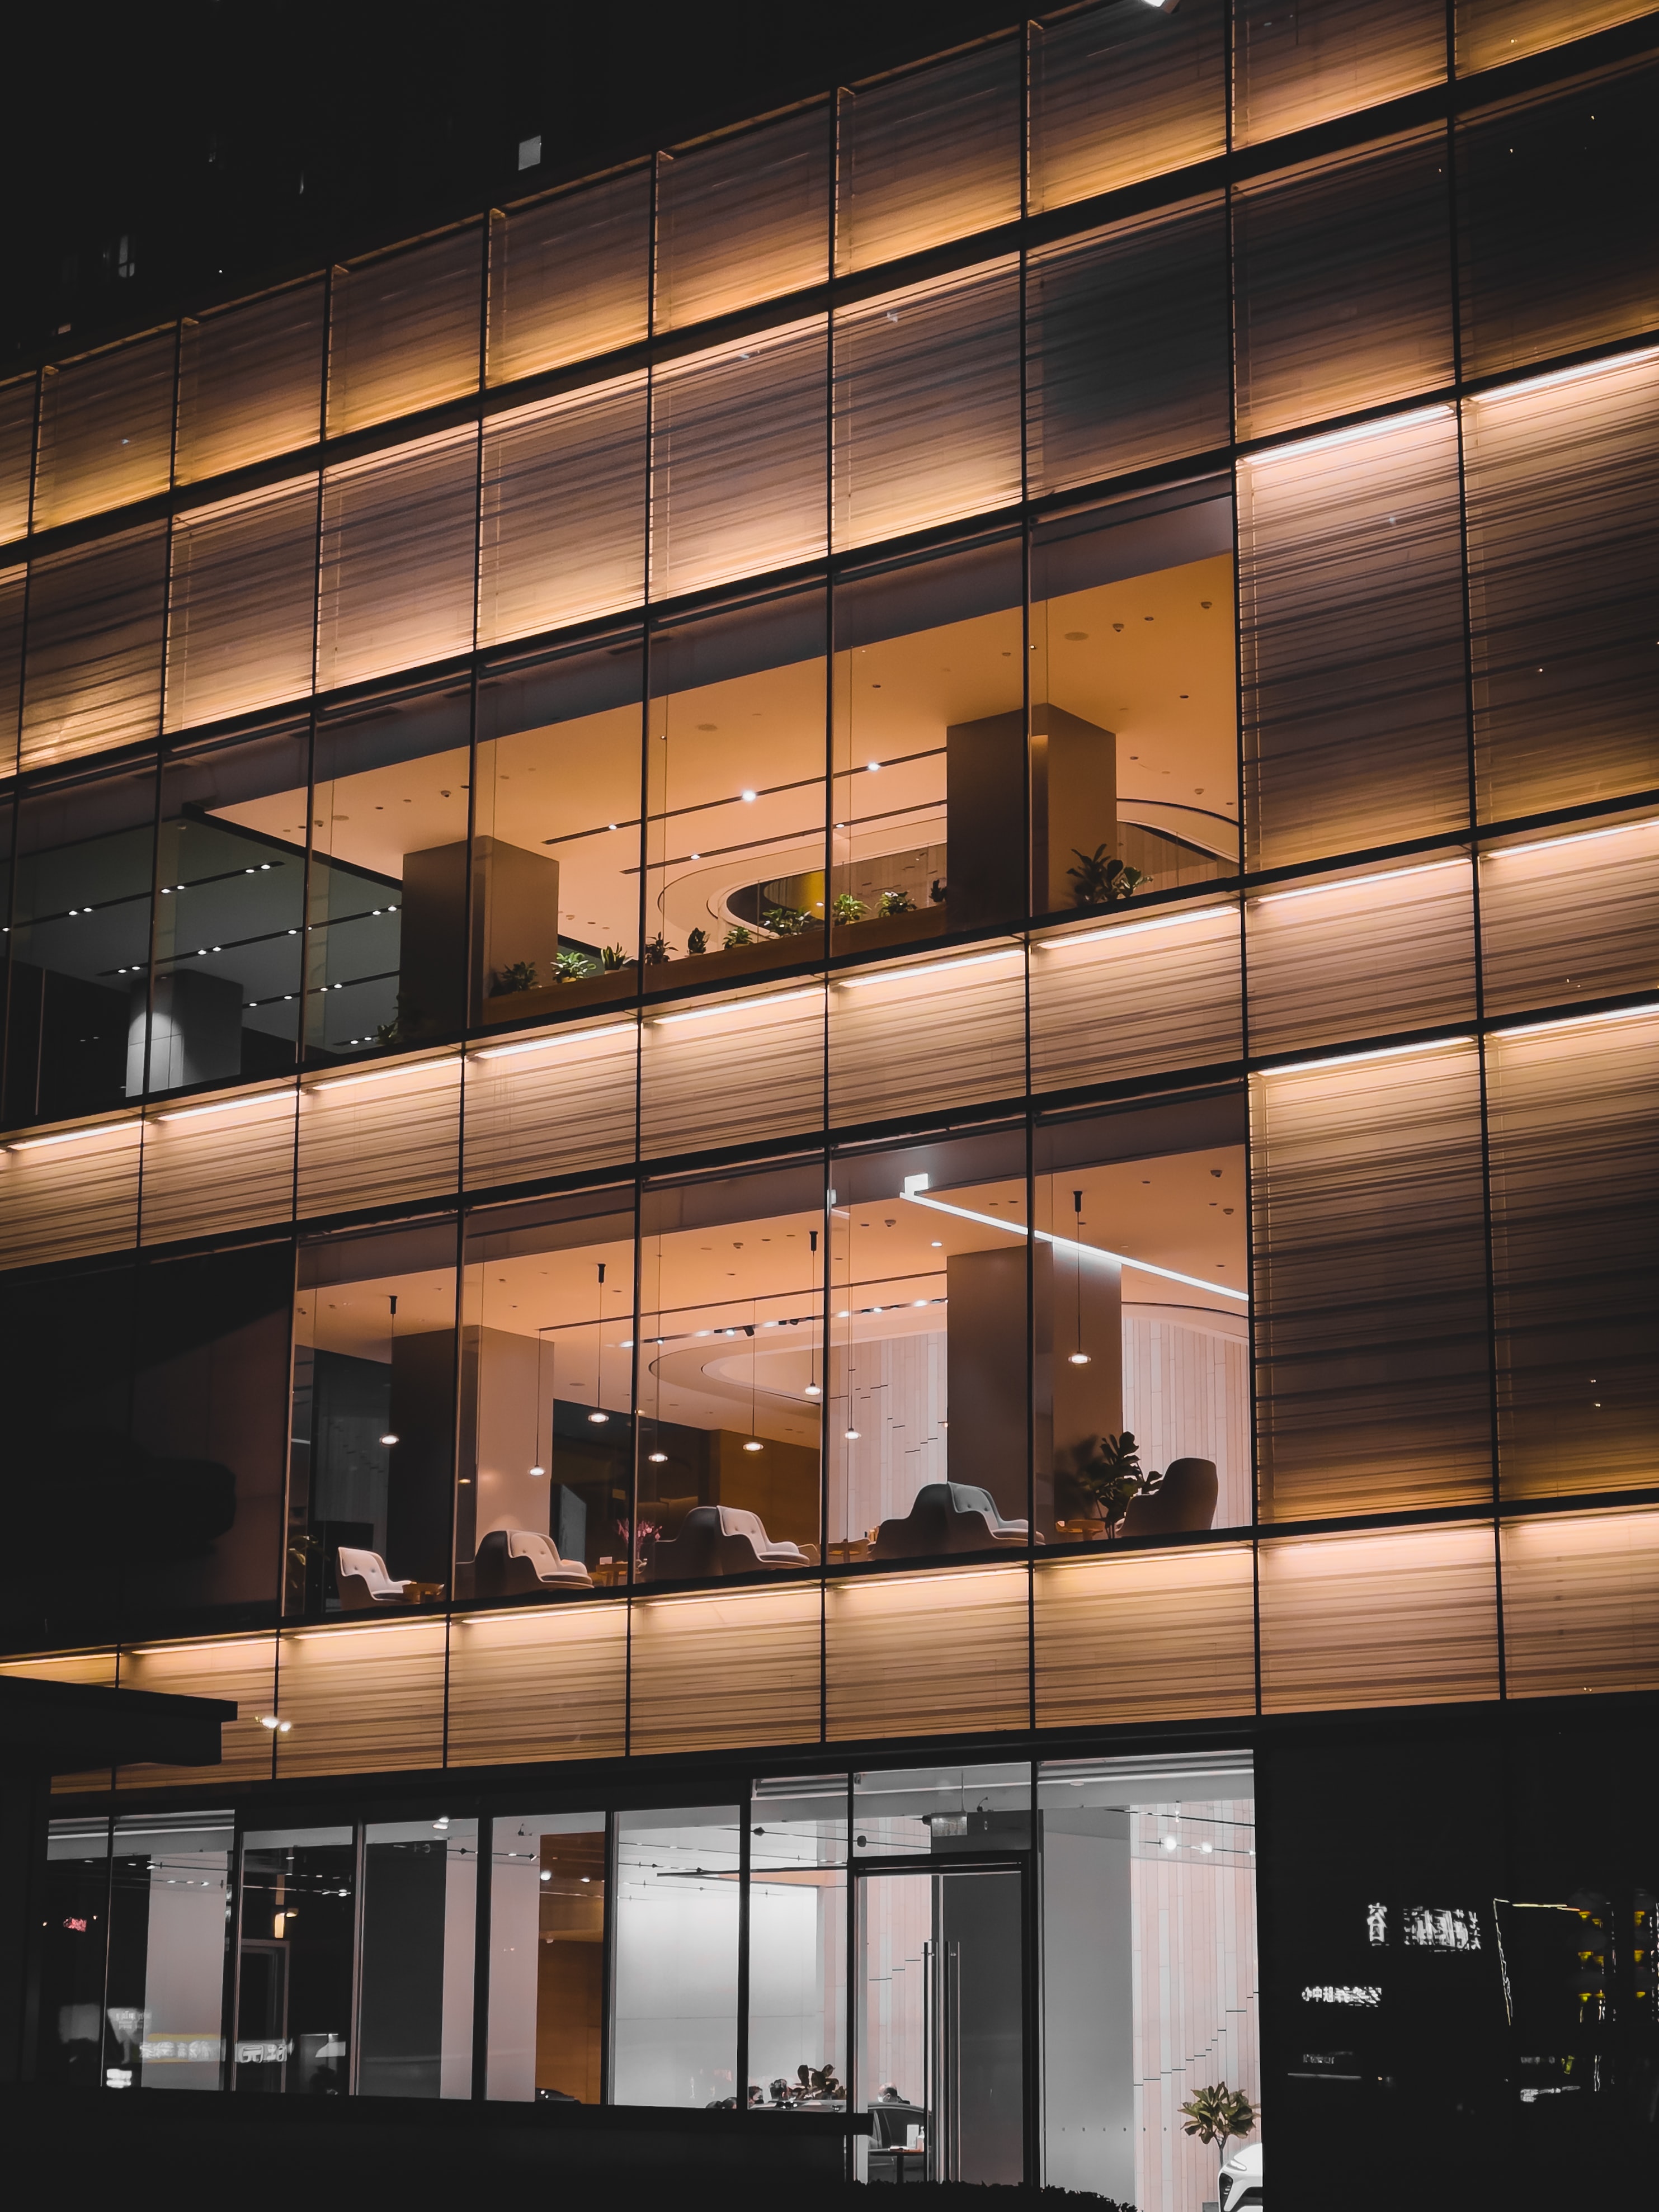 Photo of office building facade by Jeff Wang on Unsplash